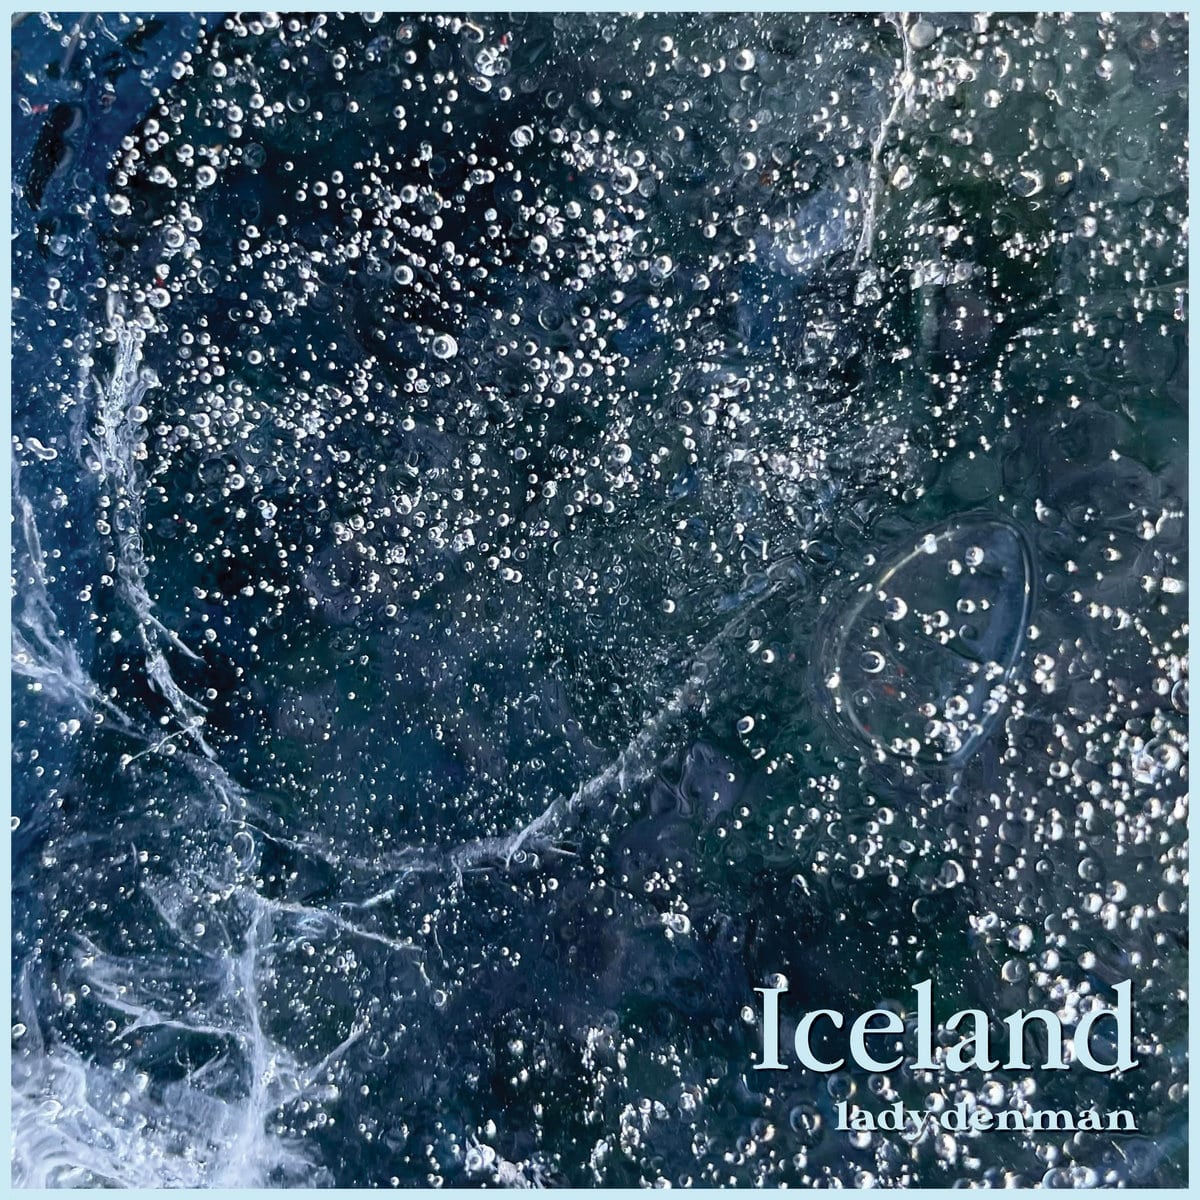 Cover art for Iceland by Lady Denman. Record: Music & vocals: Infidel Studios